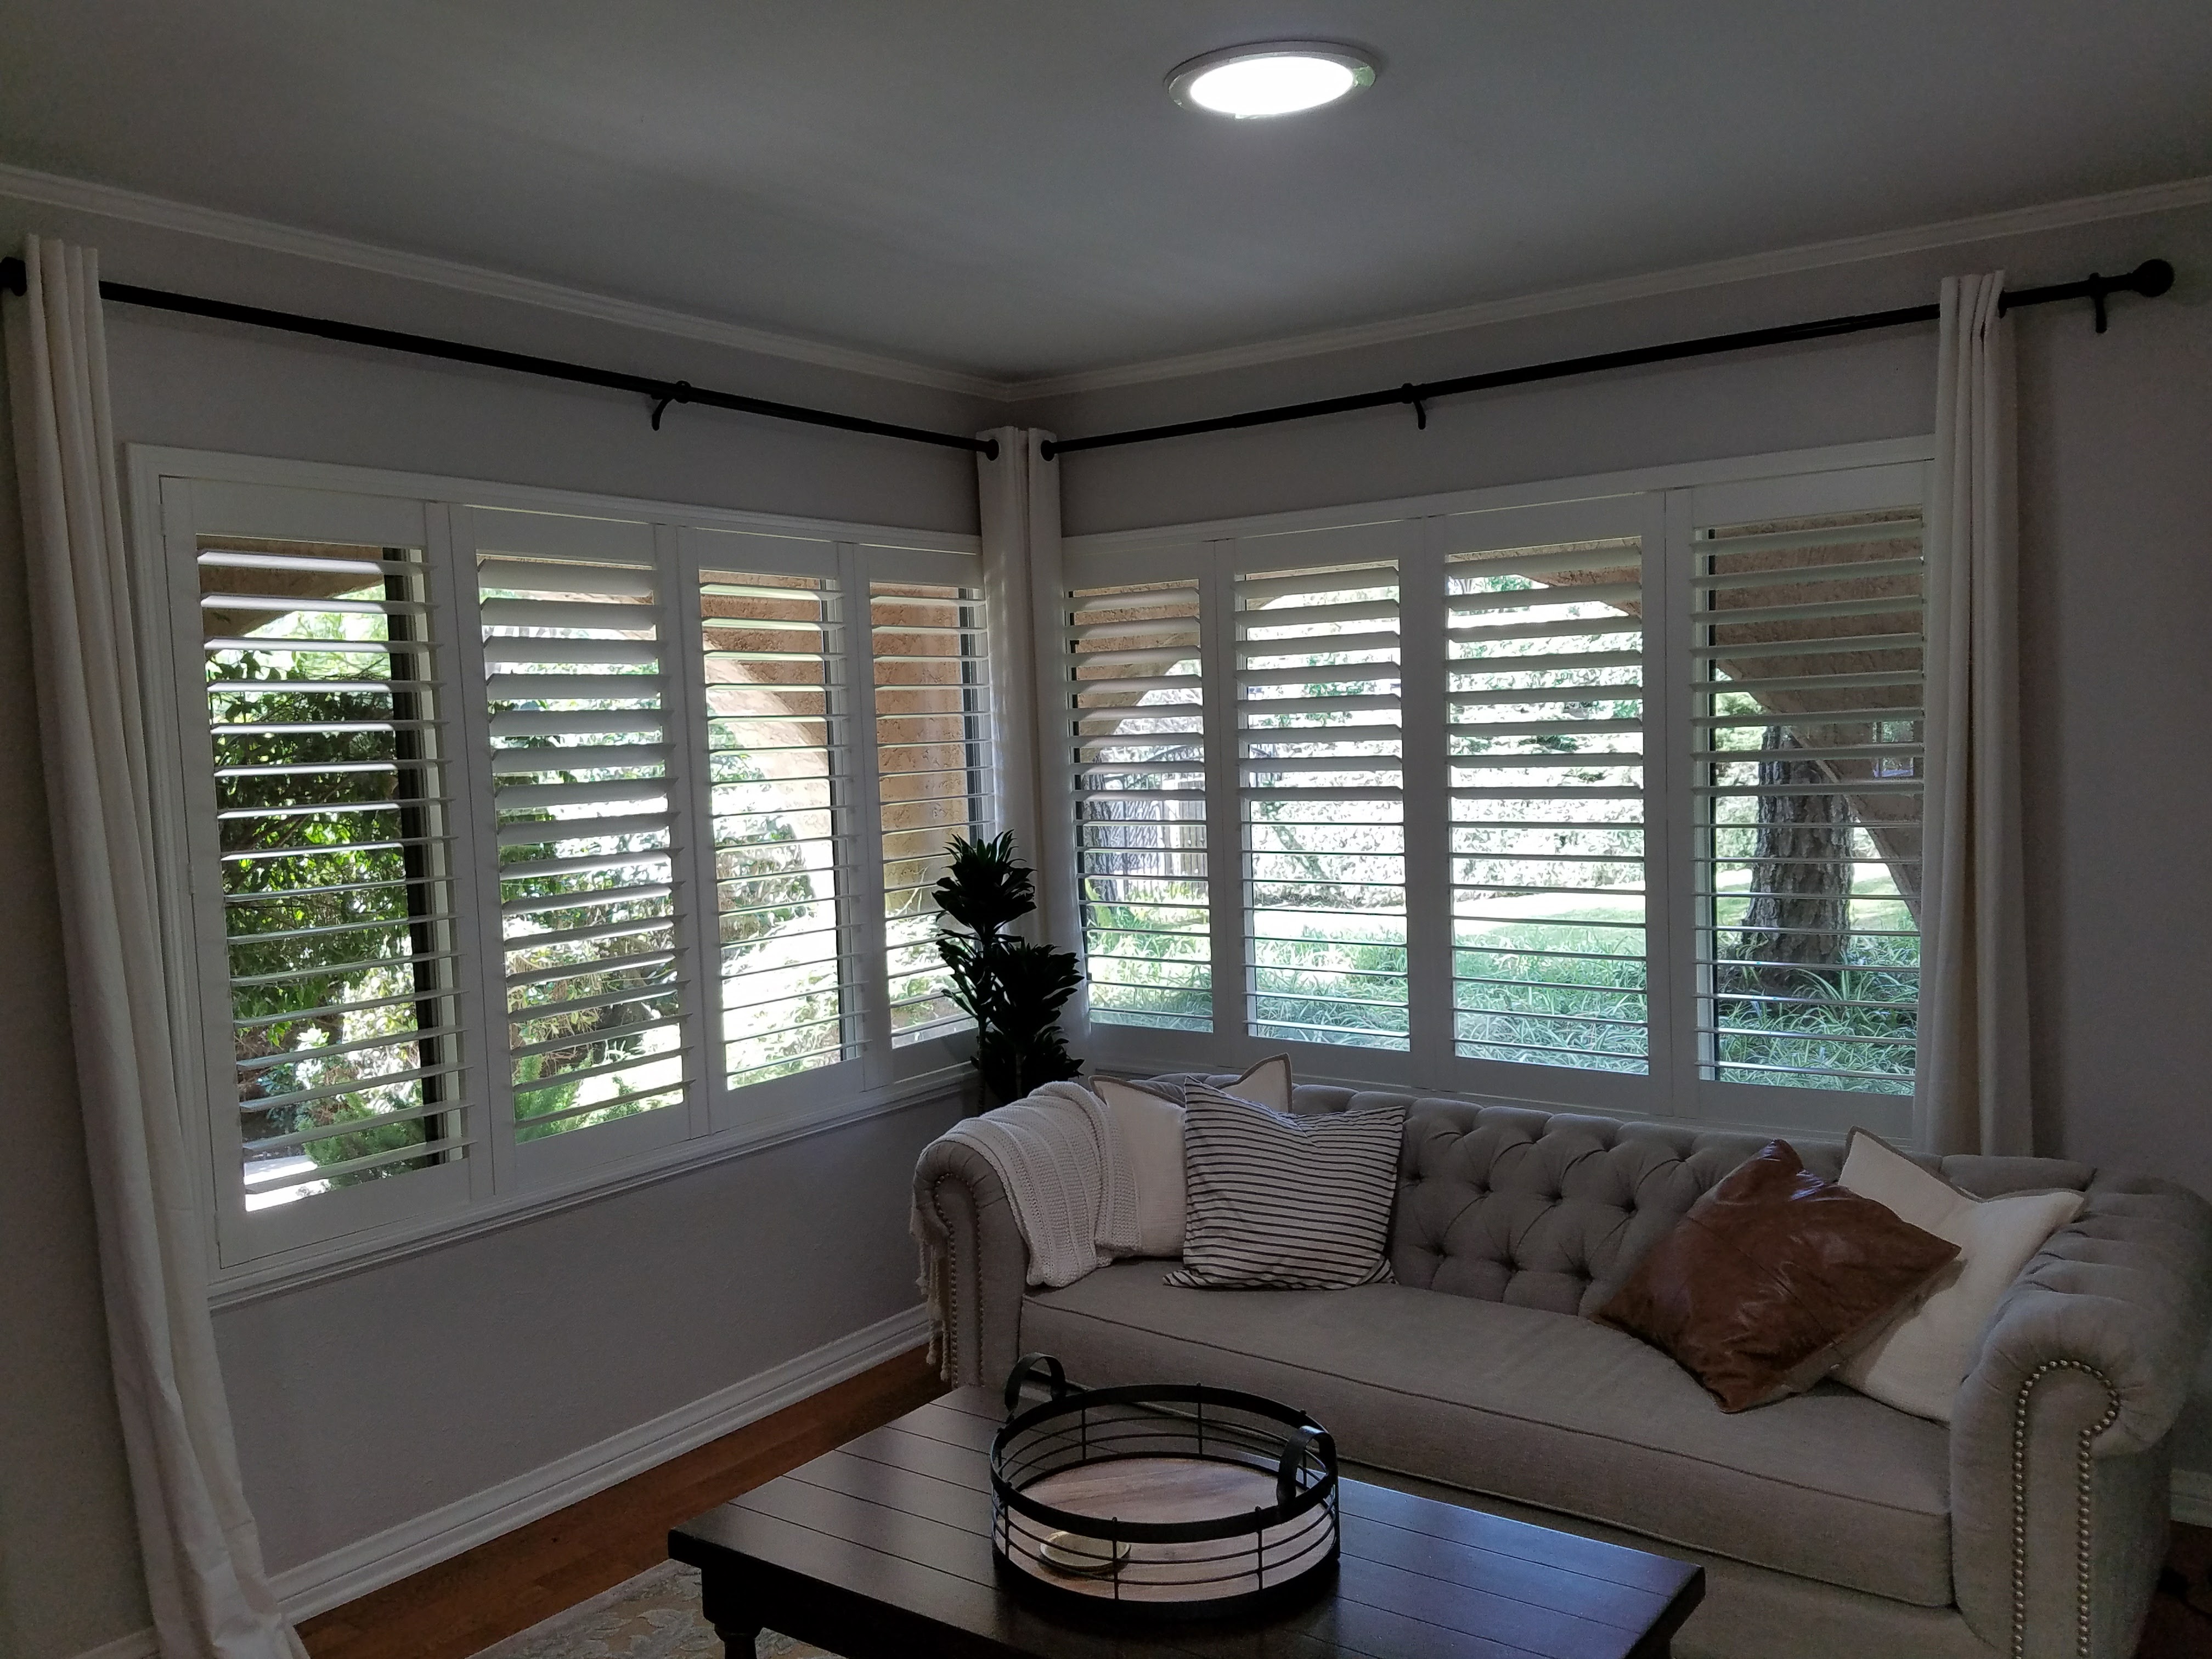 Image 23 | 805 Shutters Shades & Blinds